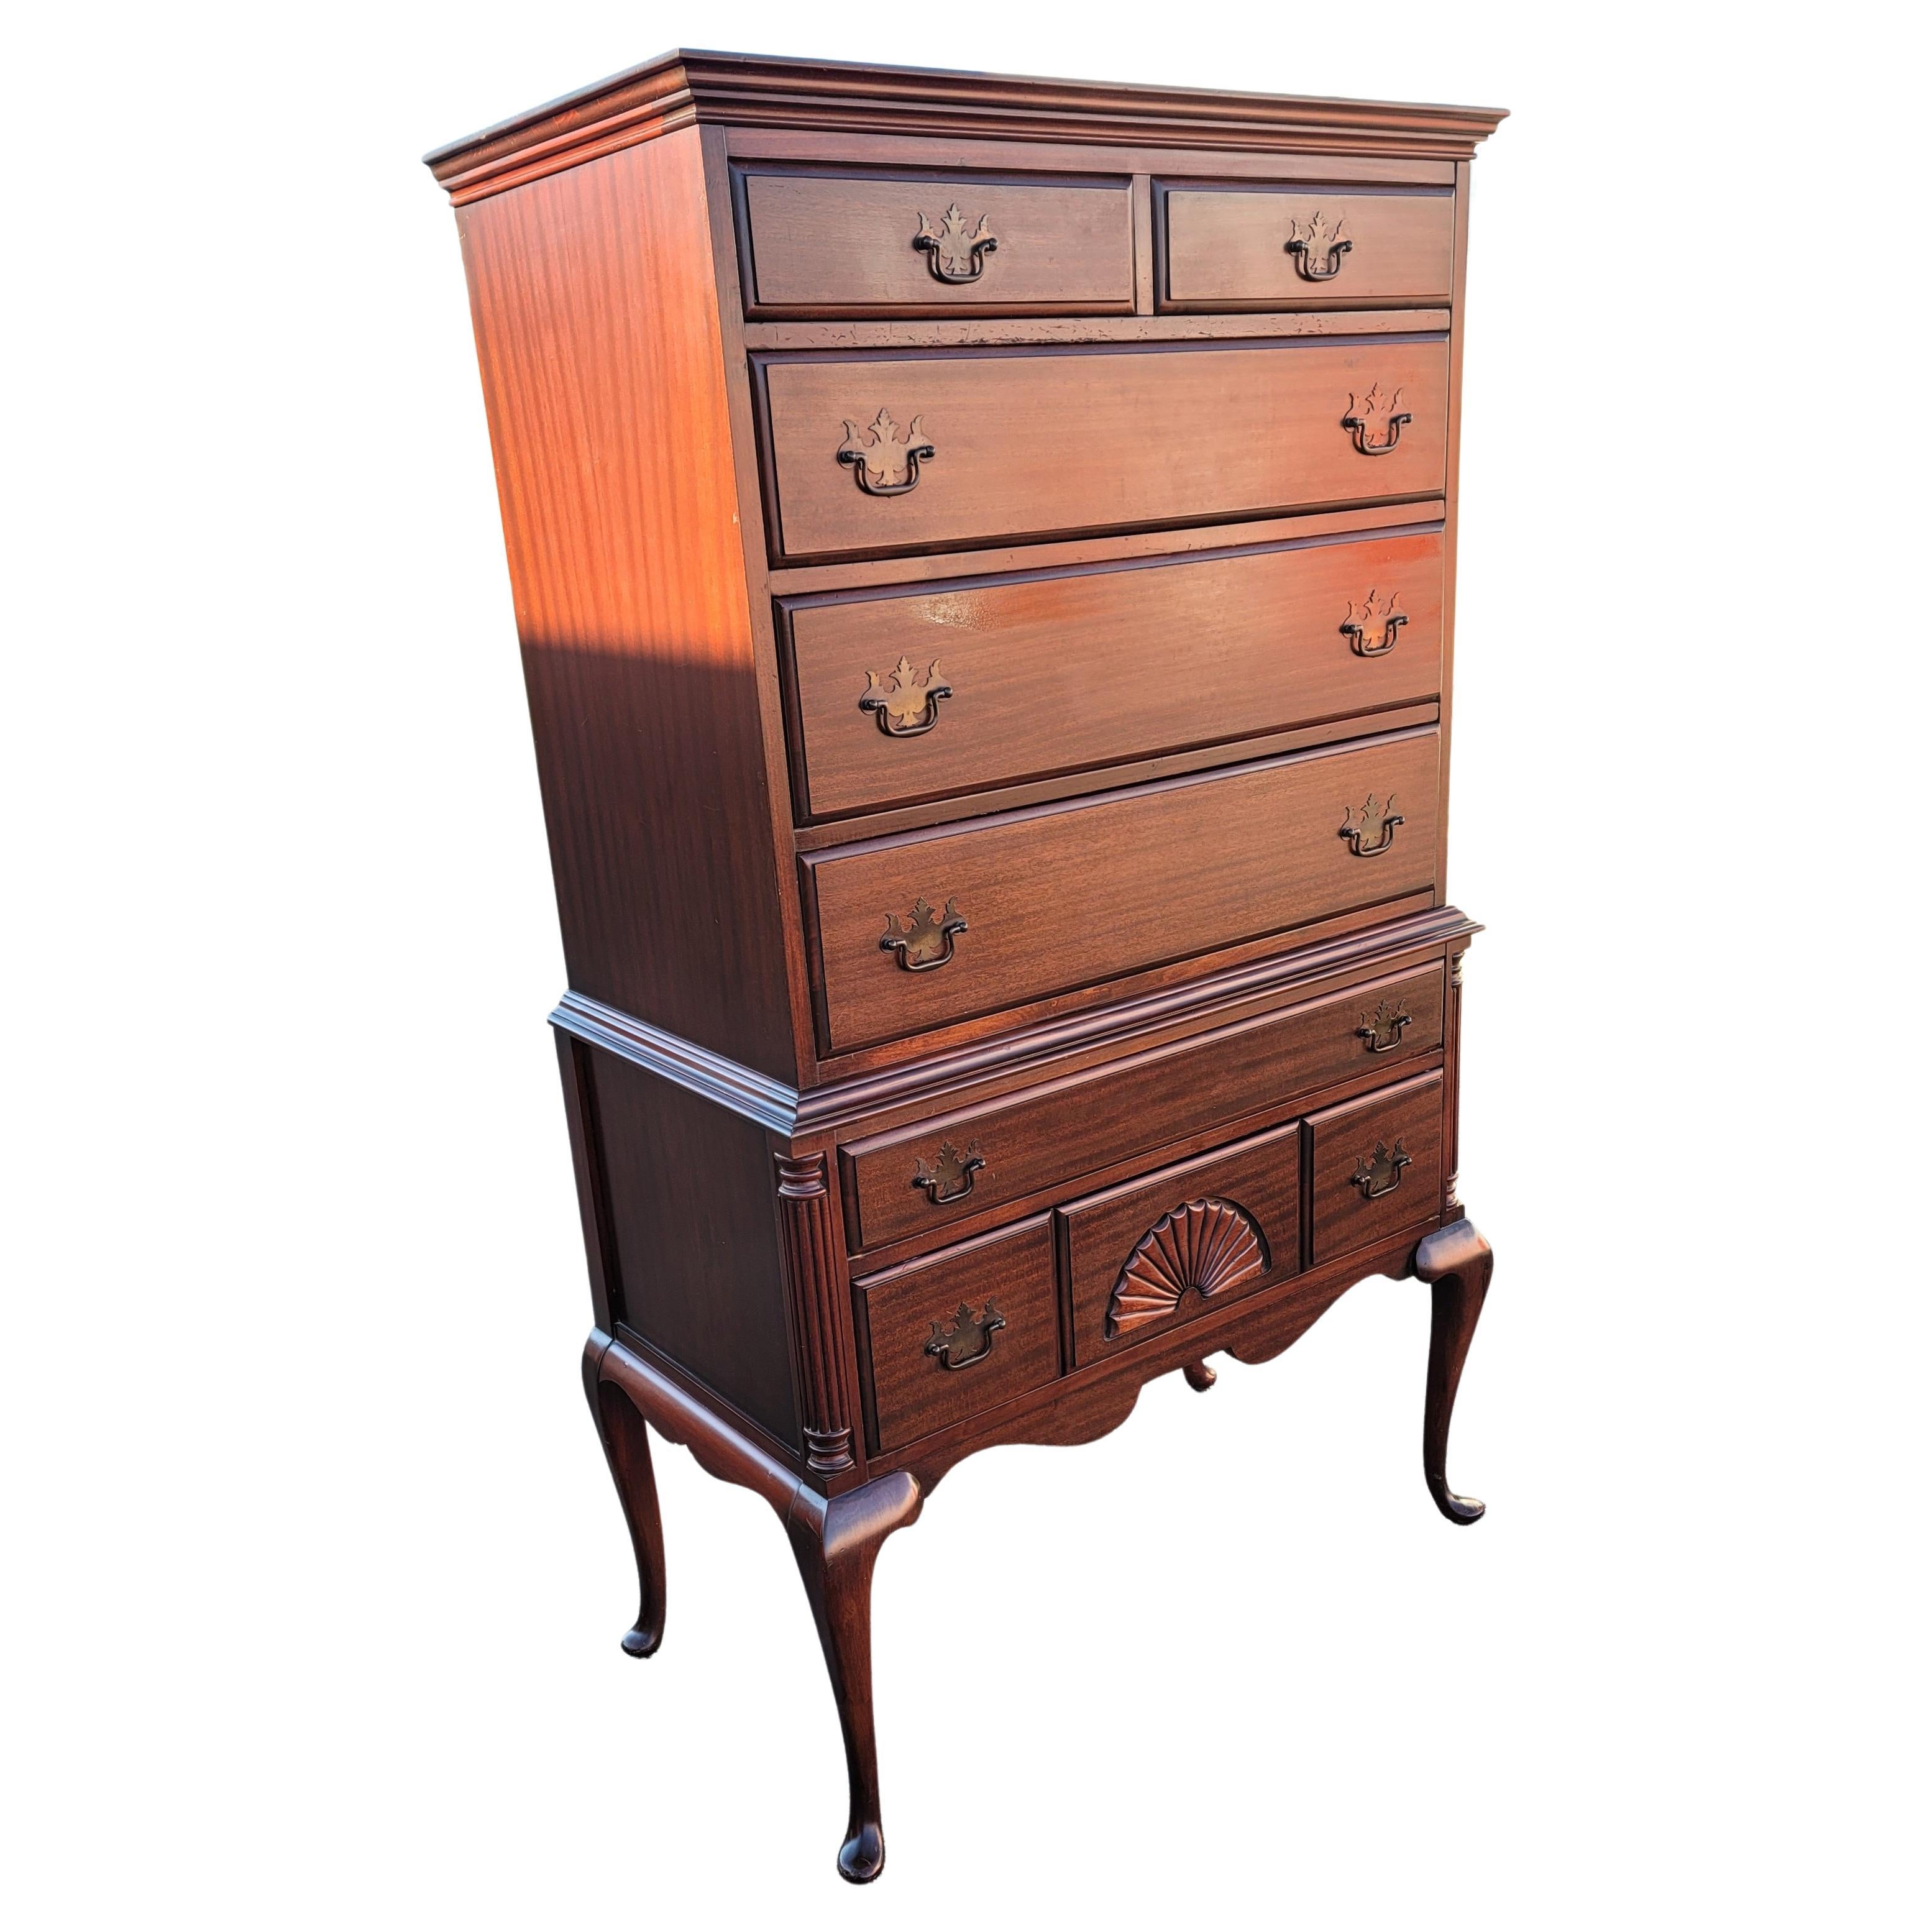 A beautiful and patinated Early 1900's Chippendale genuine Mahogany highboy chest of drawers in good condition. Beautiful mahogany grain. Dovetail drawers construction with patinated original drawer pulls. Perfectly functioning drawers. Measure